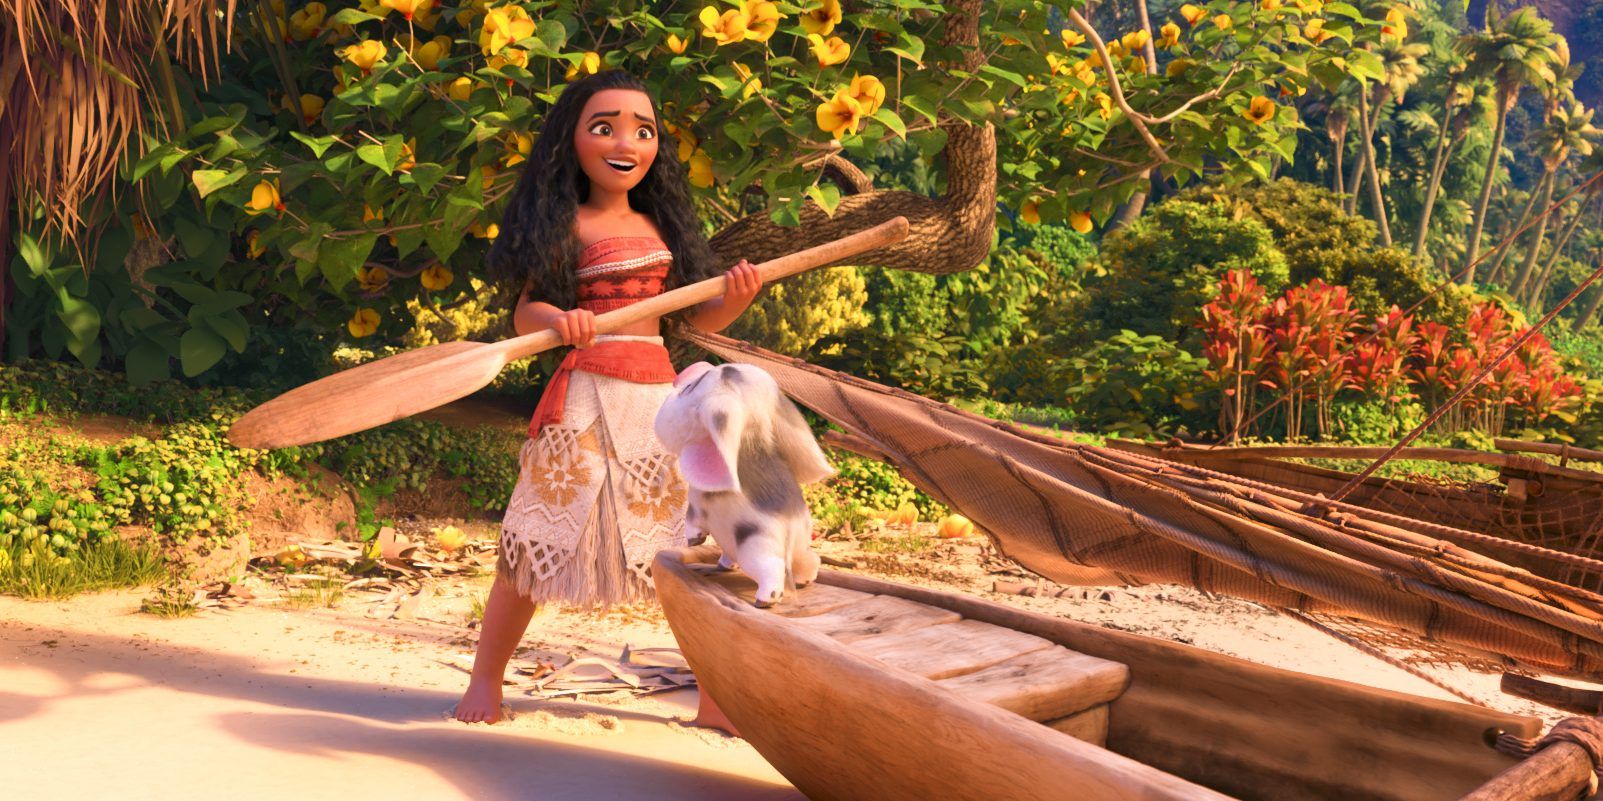 10 Animation Movies Audiences Loved According To Rotten Tomatoes